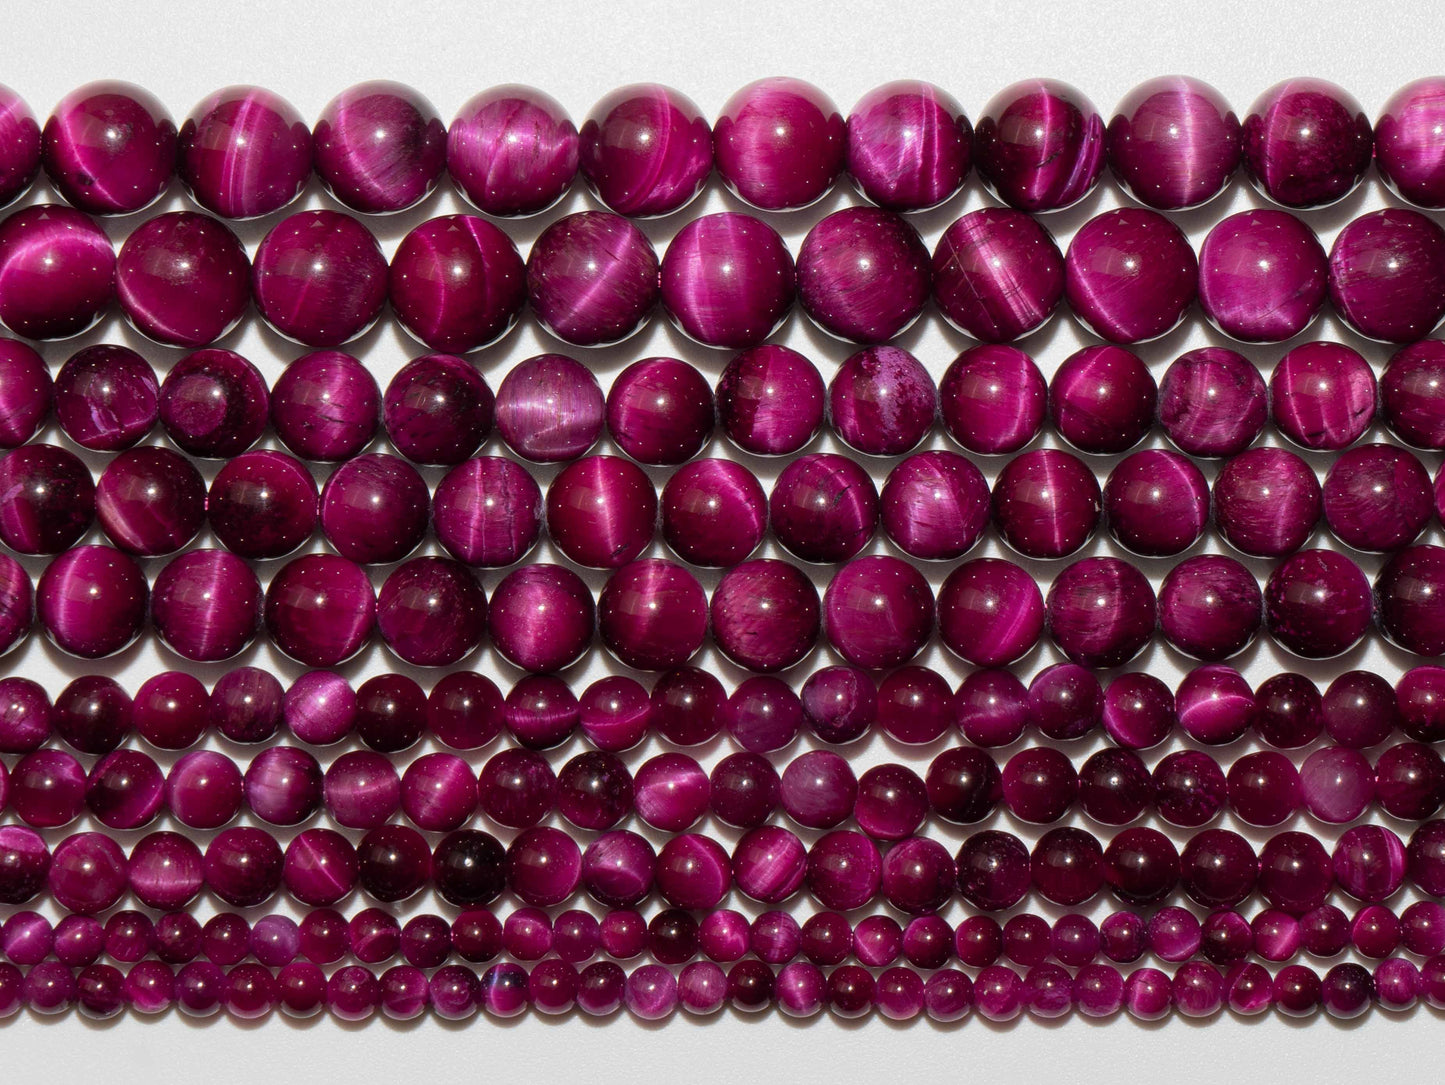 Natural Stone Rose Red Tiger Eye Beads Gemstone Loose Beads Round Shape Size Options 4/6/8/10/12mmfor Jewelry Making